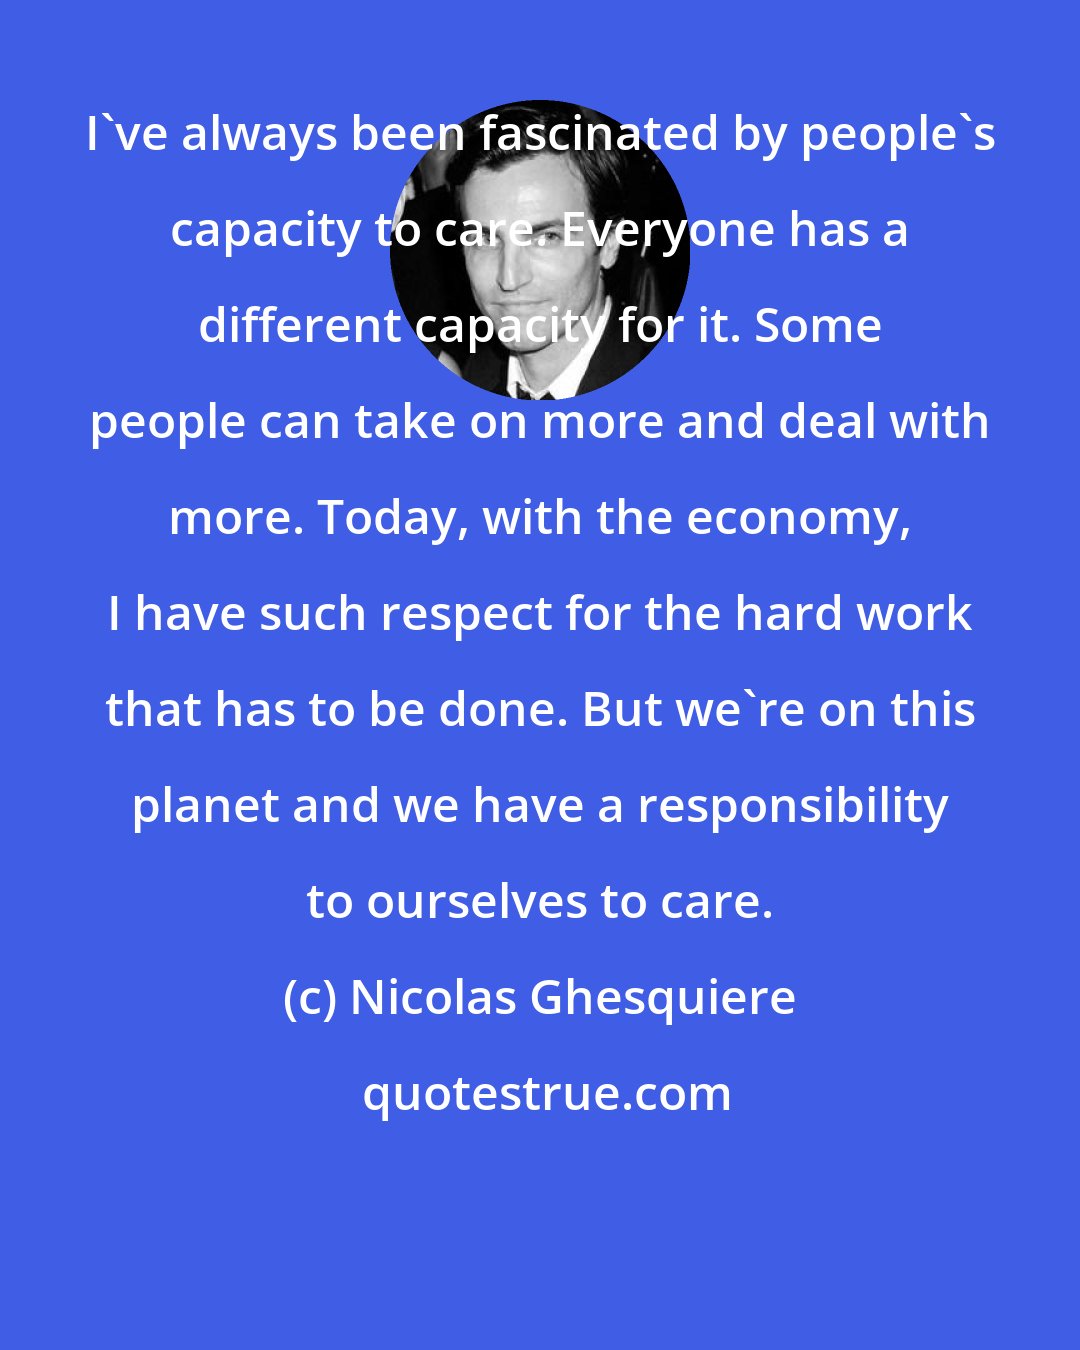 Nicolas Ghesquiere: I've always been fascinated by people's capacity to care. Everyone has a different capacity for it. Some people can take on more and deal with more. Today, with the economy, I have such respect for the hard work that has to be done. But we're on this planet and we have a responsibility to ourselves to care.